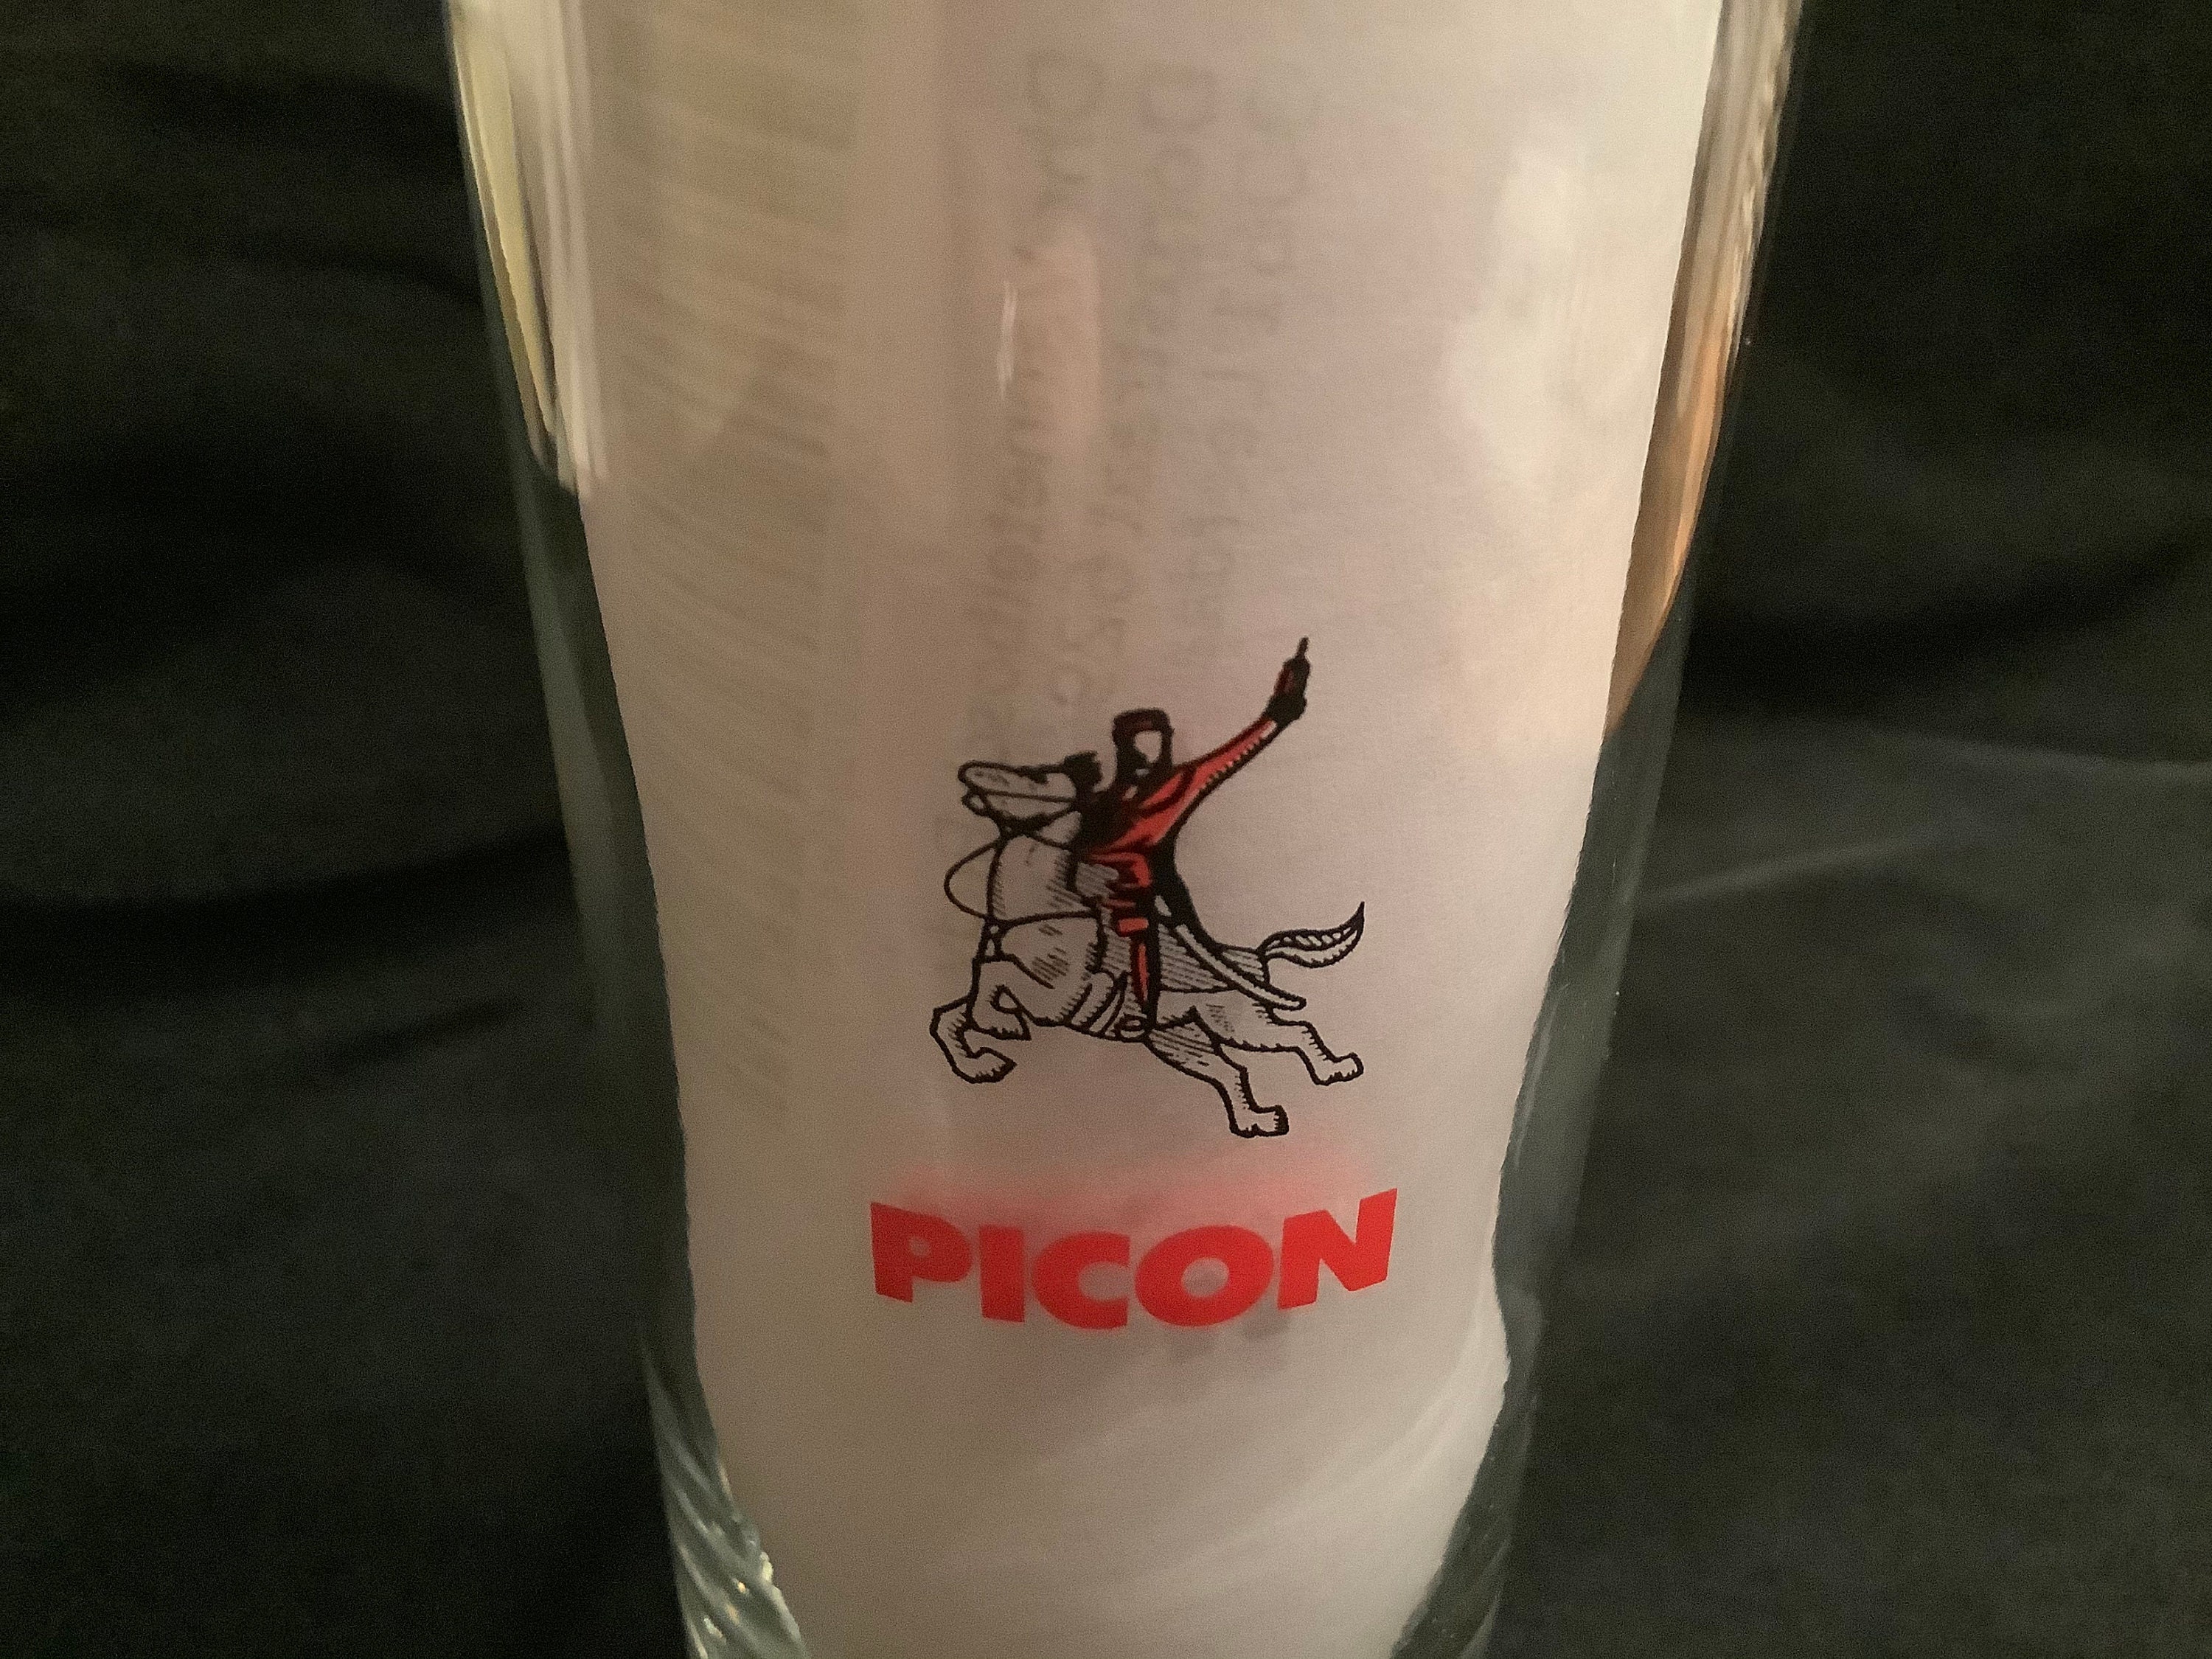 Buy Vintage Picon Glass With the Knight in Black With a Red Coat